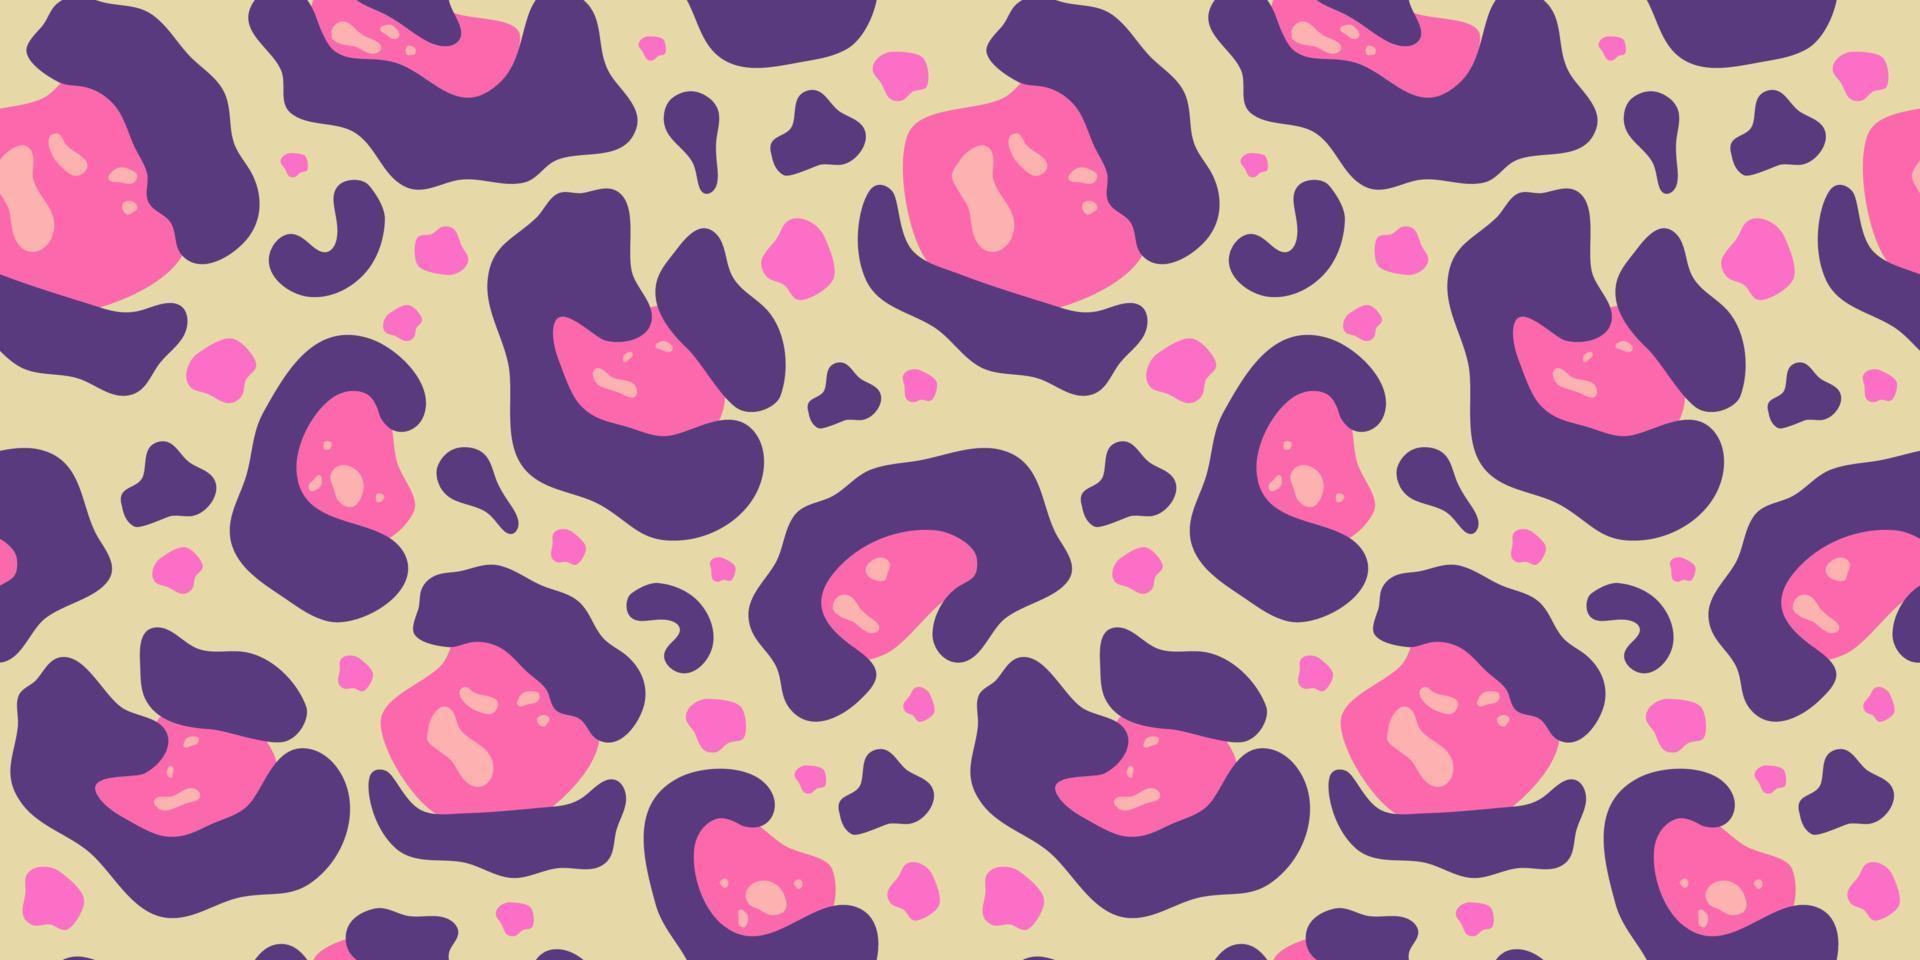 https://static.vecteezy.com/system/resources/previews/013/948/592/non_2x/y2k-leopard-seamless-background-psychedelic-pink-leopard-print-seamless-abstract-animal-skin-pattern-trendy-illustration-graphic-illustration-vector.jpg